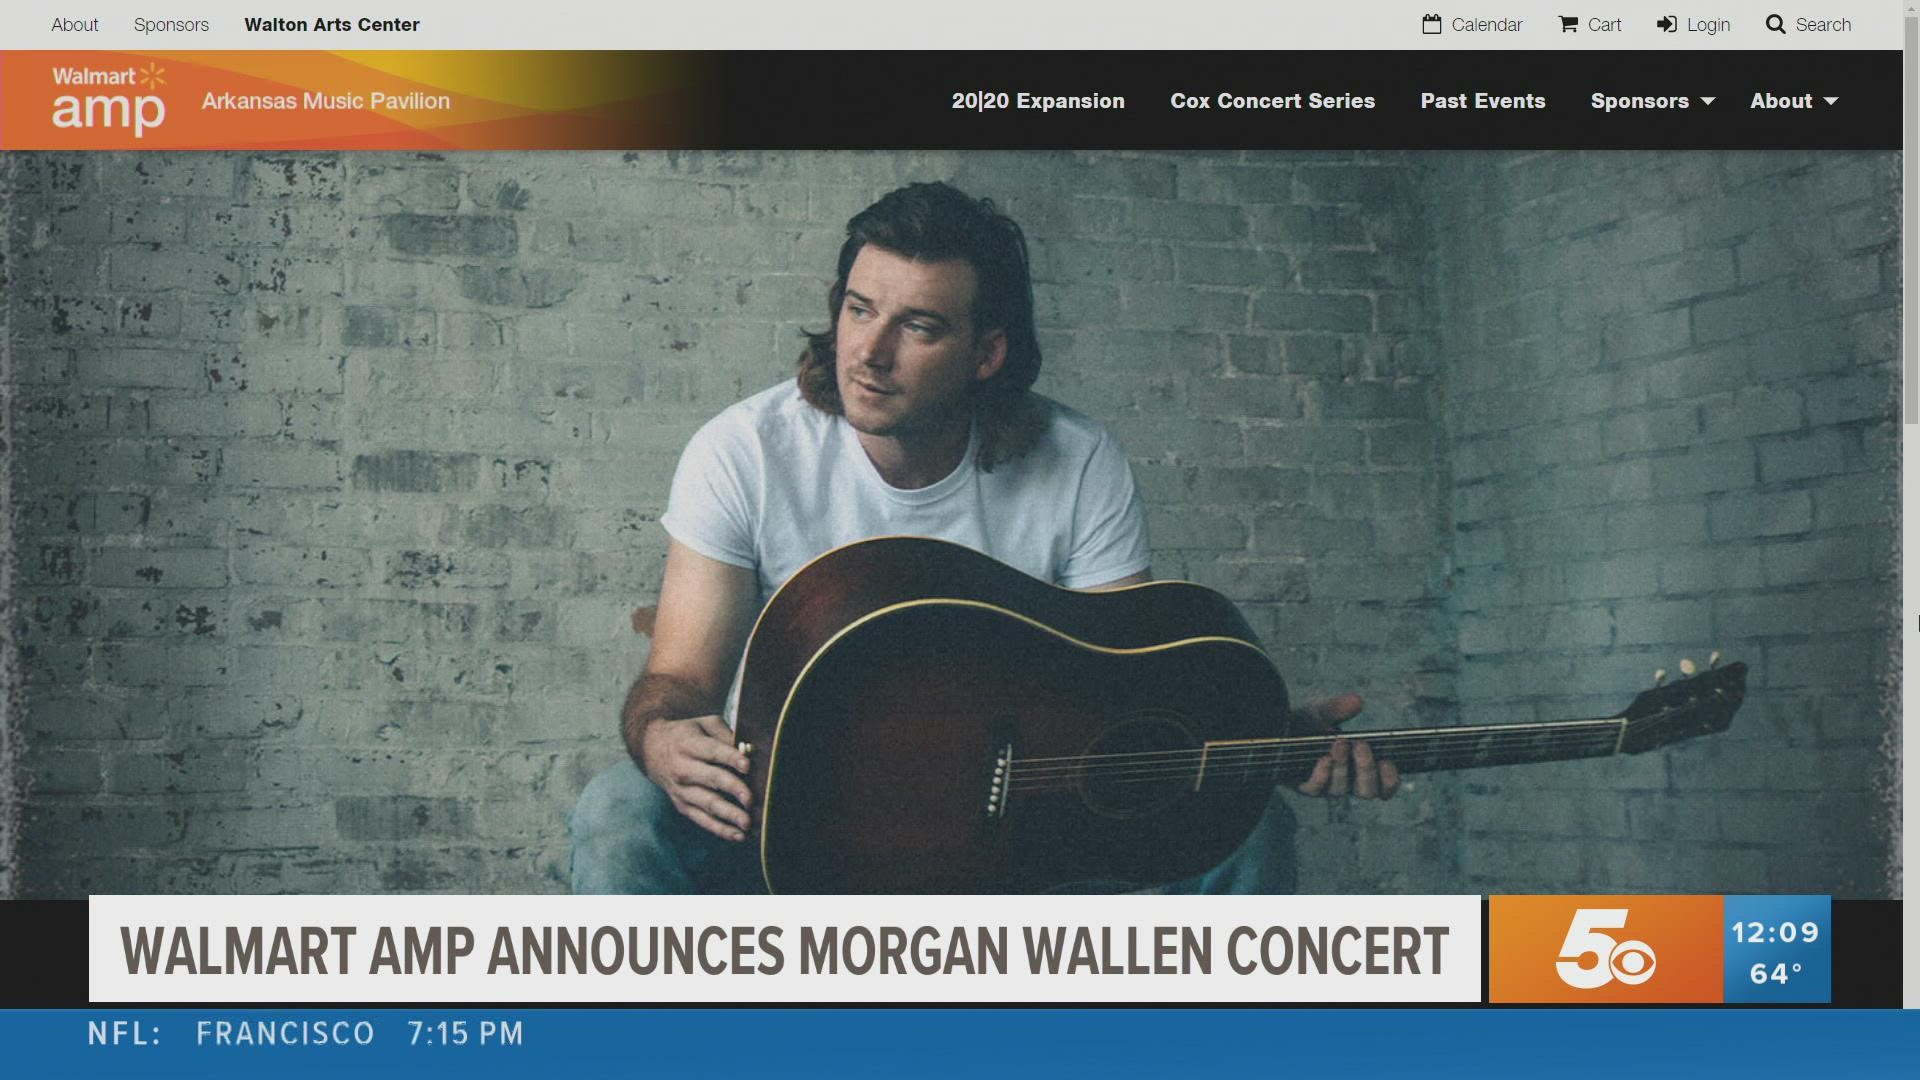 Wallen will perform on Friday, Aug. 26, 2022. Tickets go on sale to the public on Friday, Dec. 3 at 10 a.m.